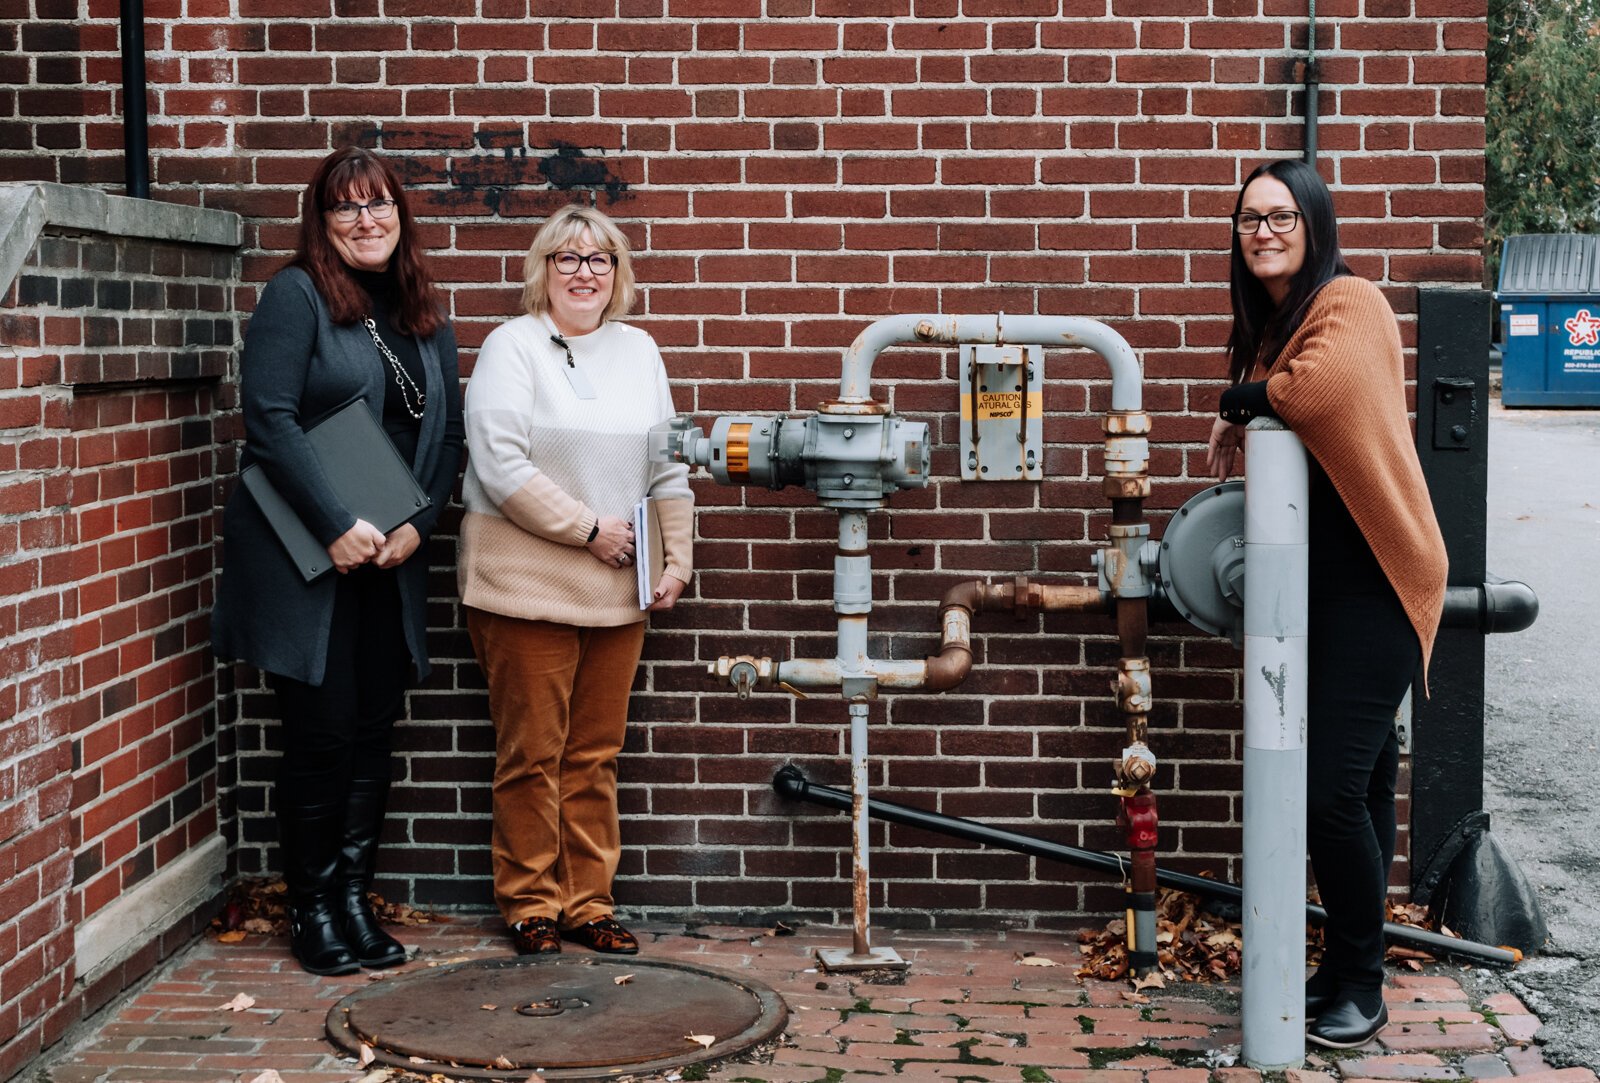 Lesa Cassel, left, Brightpoint Family Support Services Manager, Pam Brookshire, center, Brightpoint VP of Community Services, and Dana Berkes, right, Public Affairs & Economic Development Manager at NIPSCO, in front of a gas meter outside Brightpoint